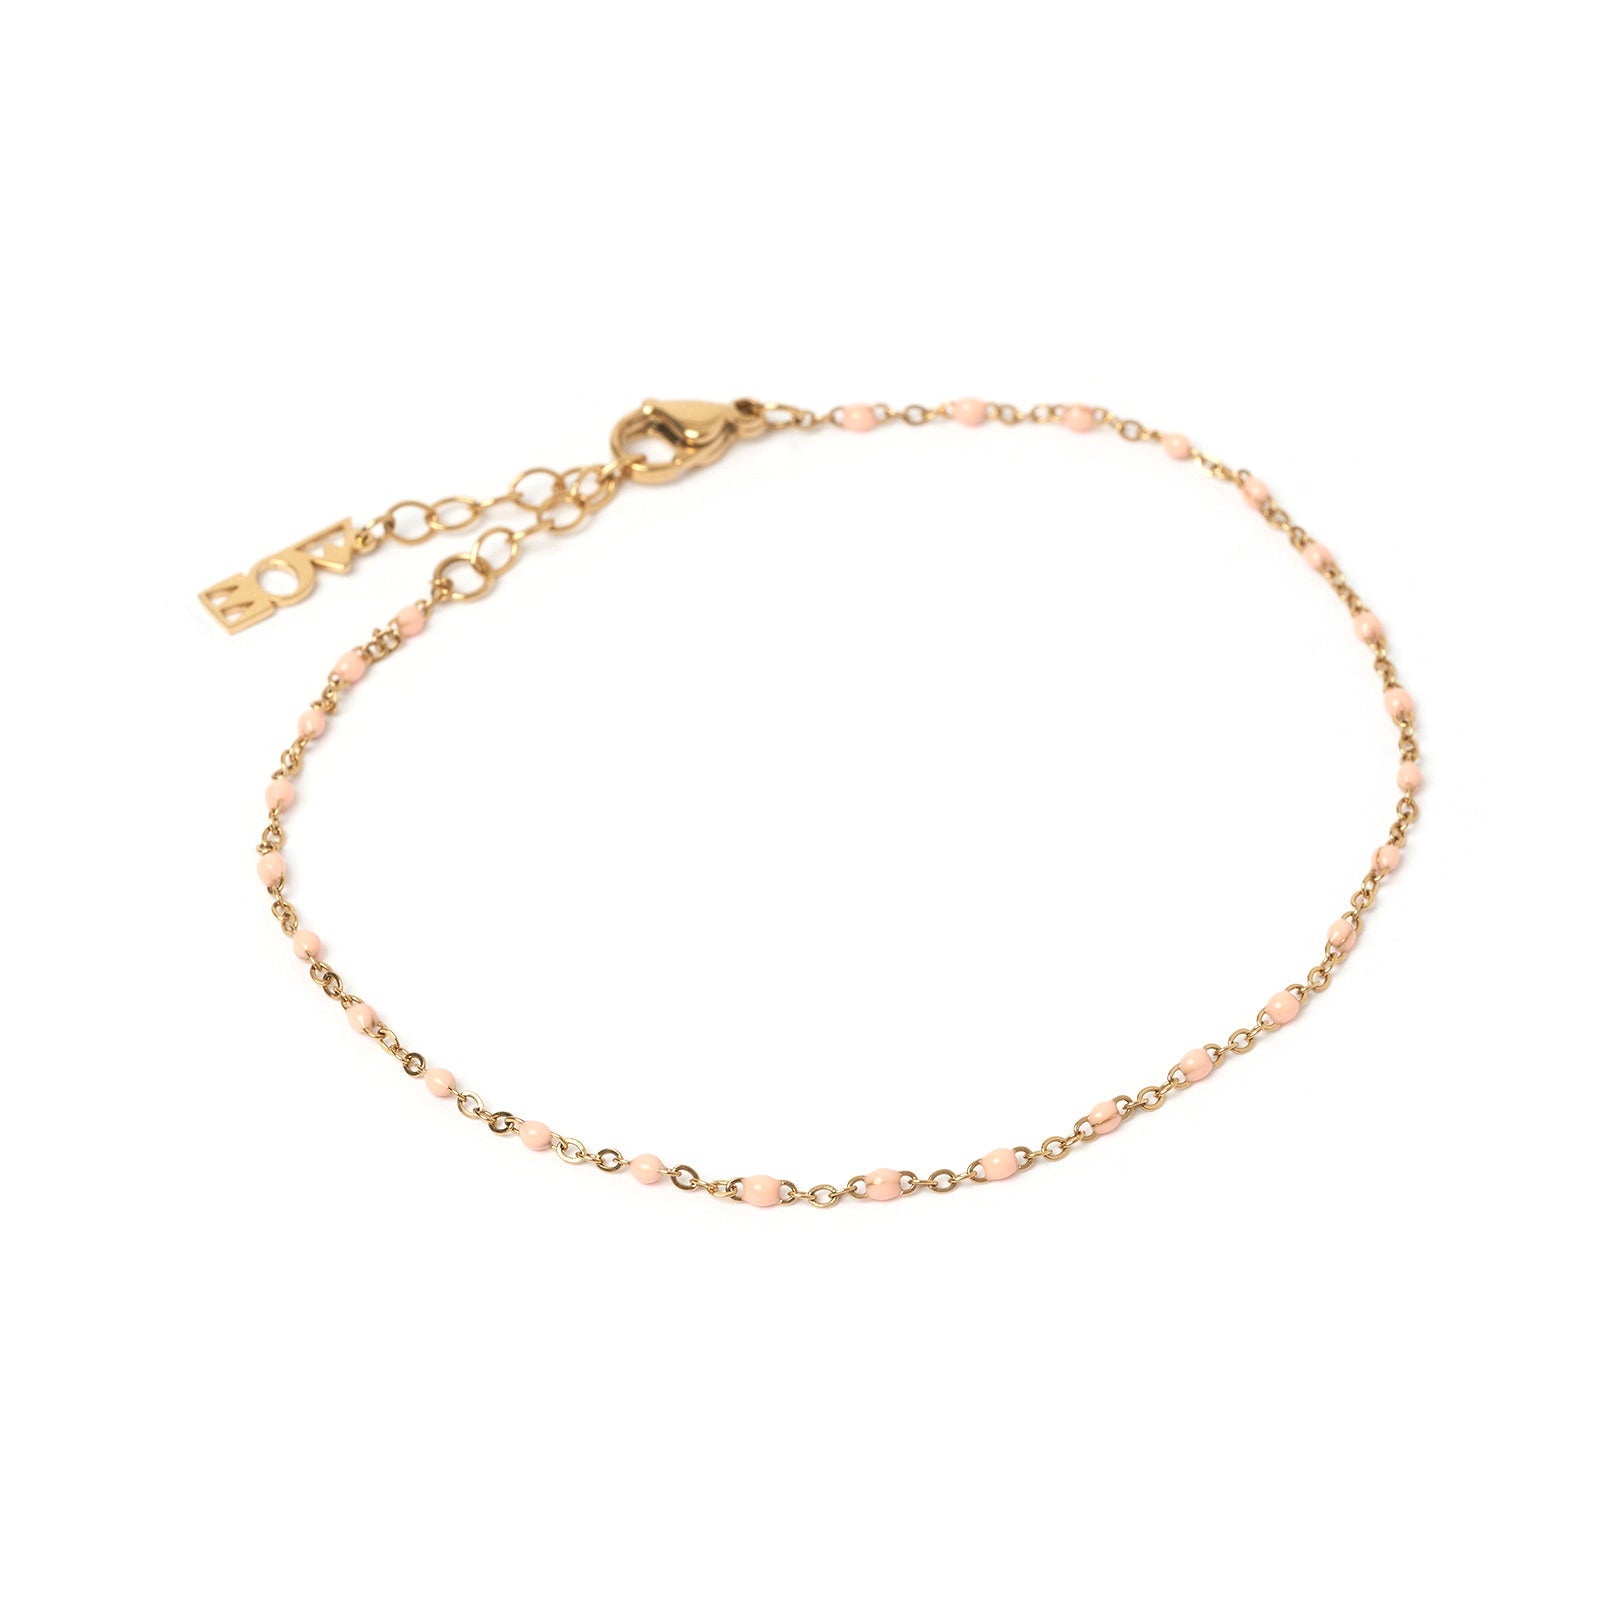 Peggy Gold and Enamel Anklet - Peach